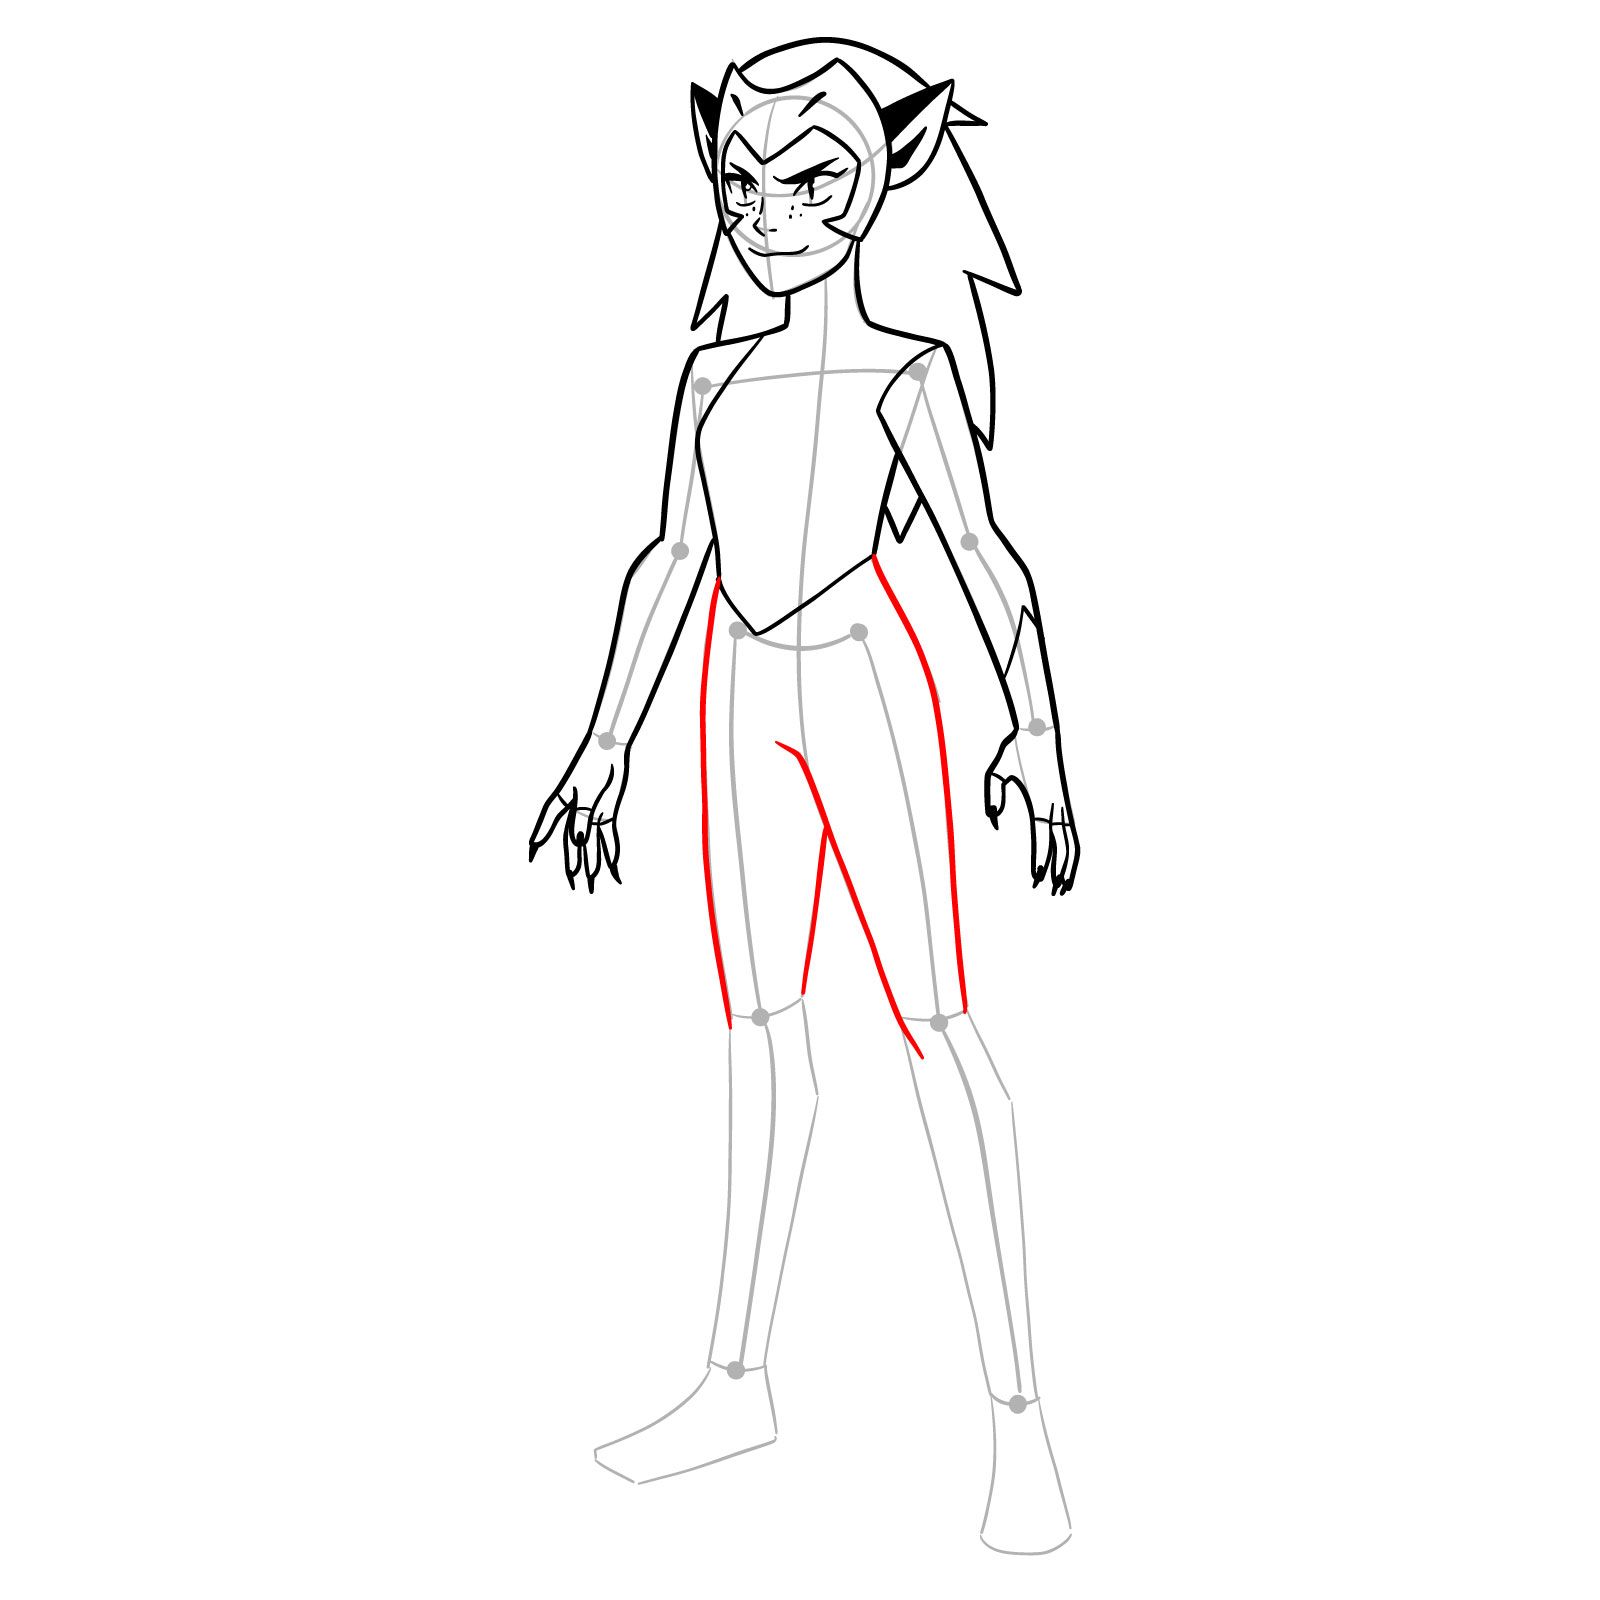 How to draw Catra from She-Ra and the Princesses of Power - step 14